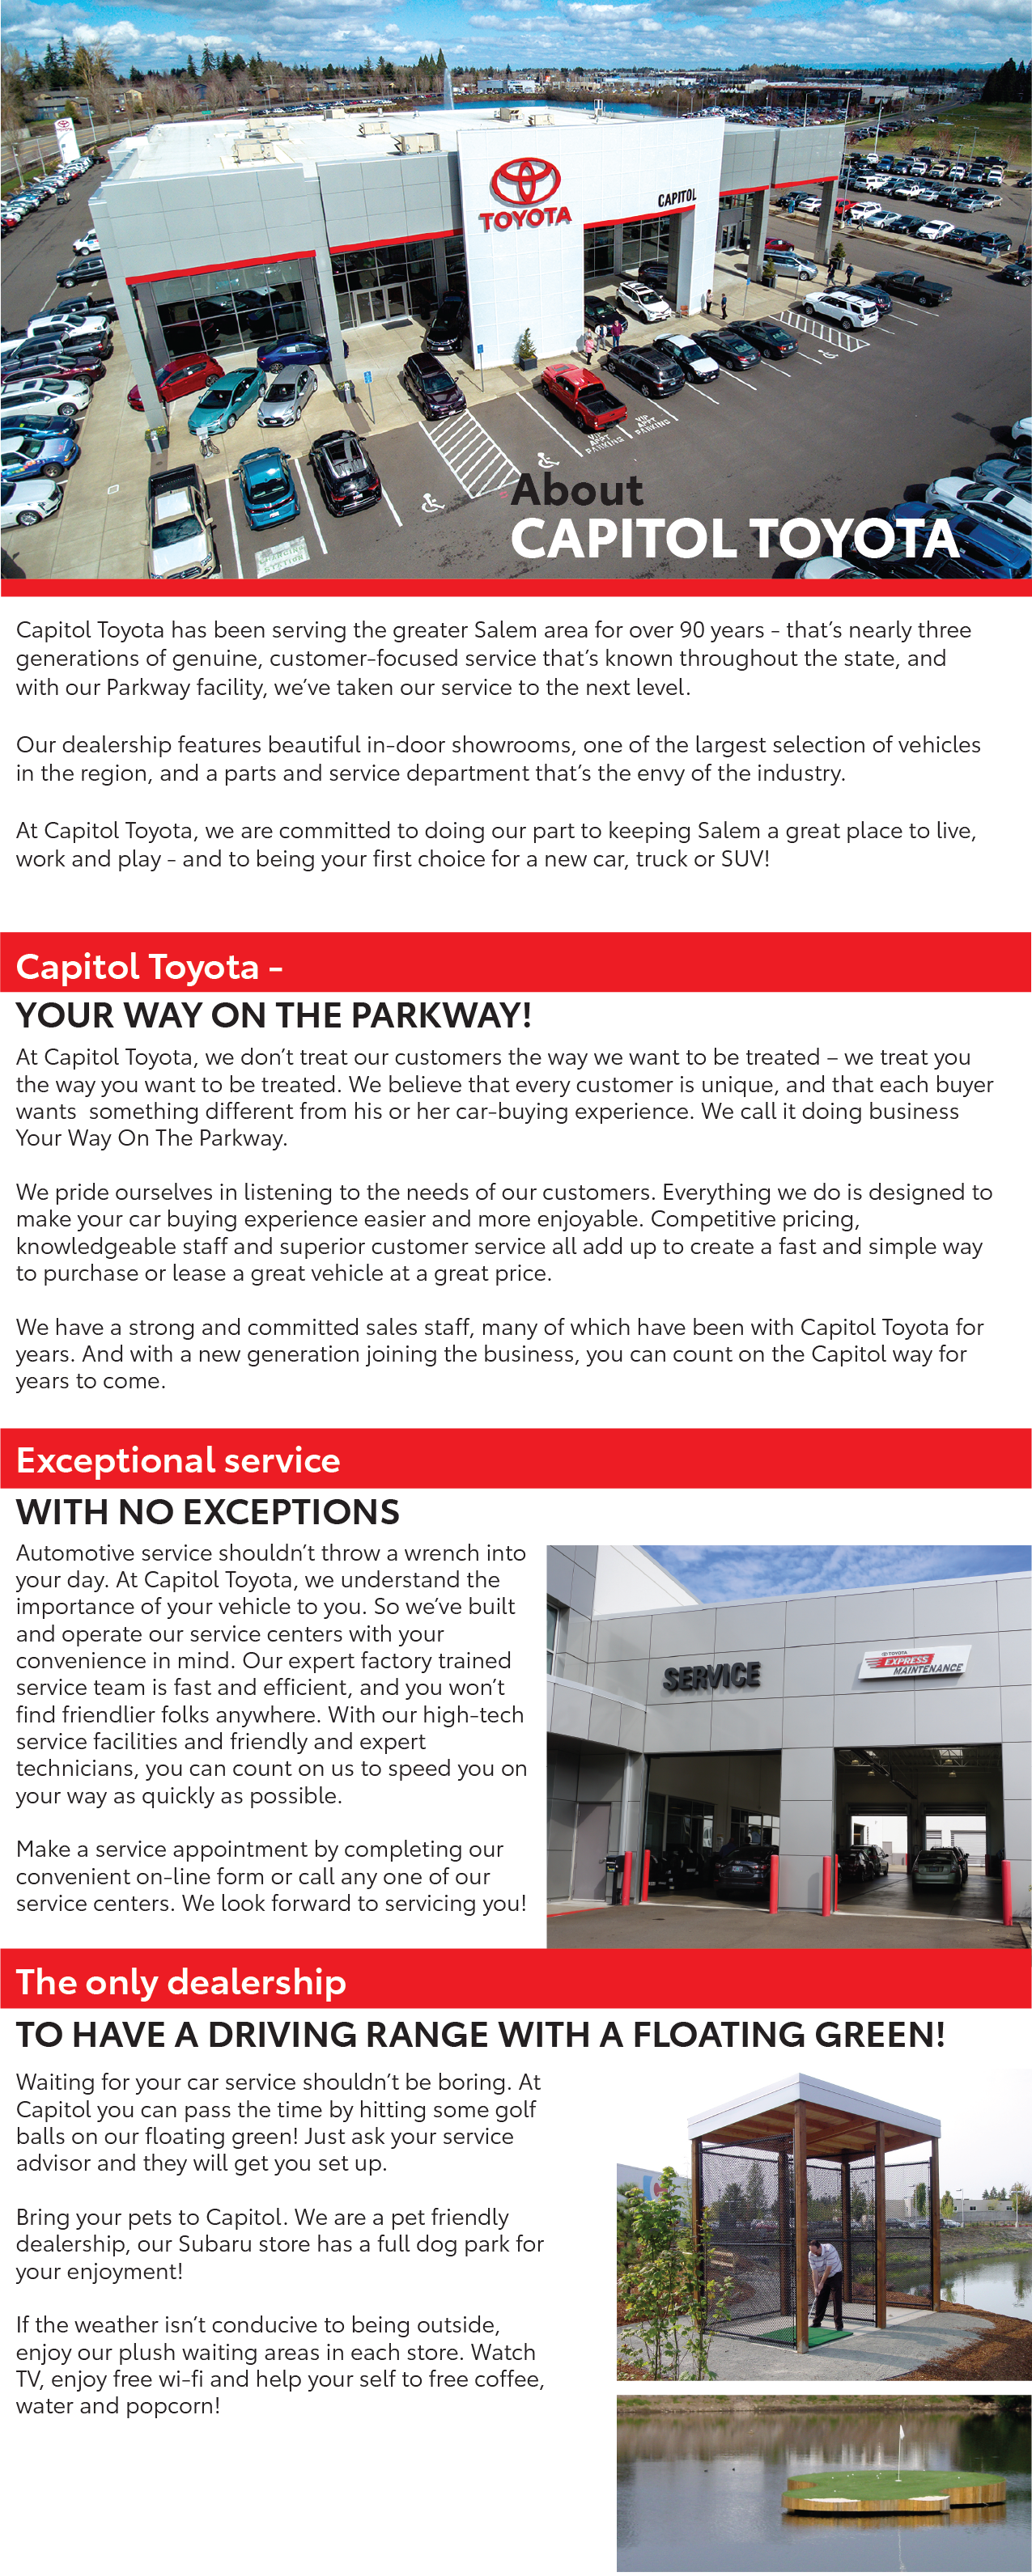 About Capitol Toyota